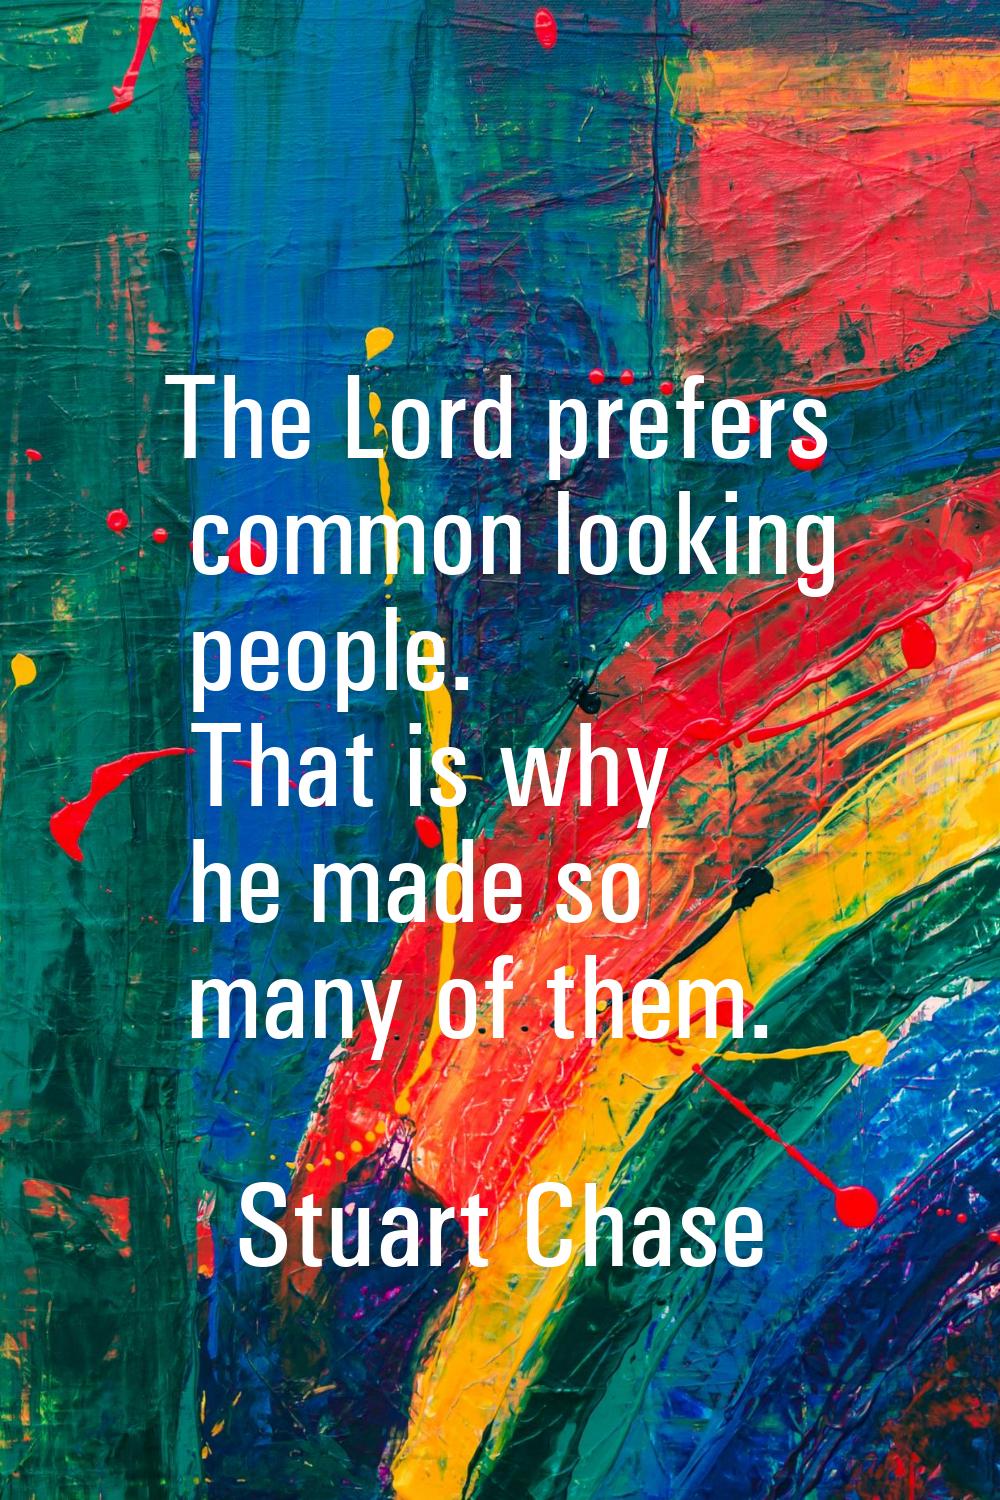 The Lord prefers common looking people. That is why he made so many of them.